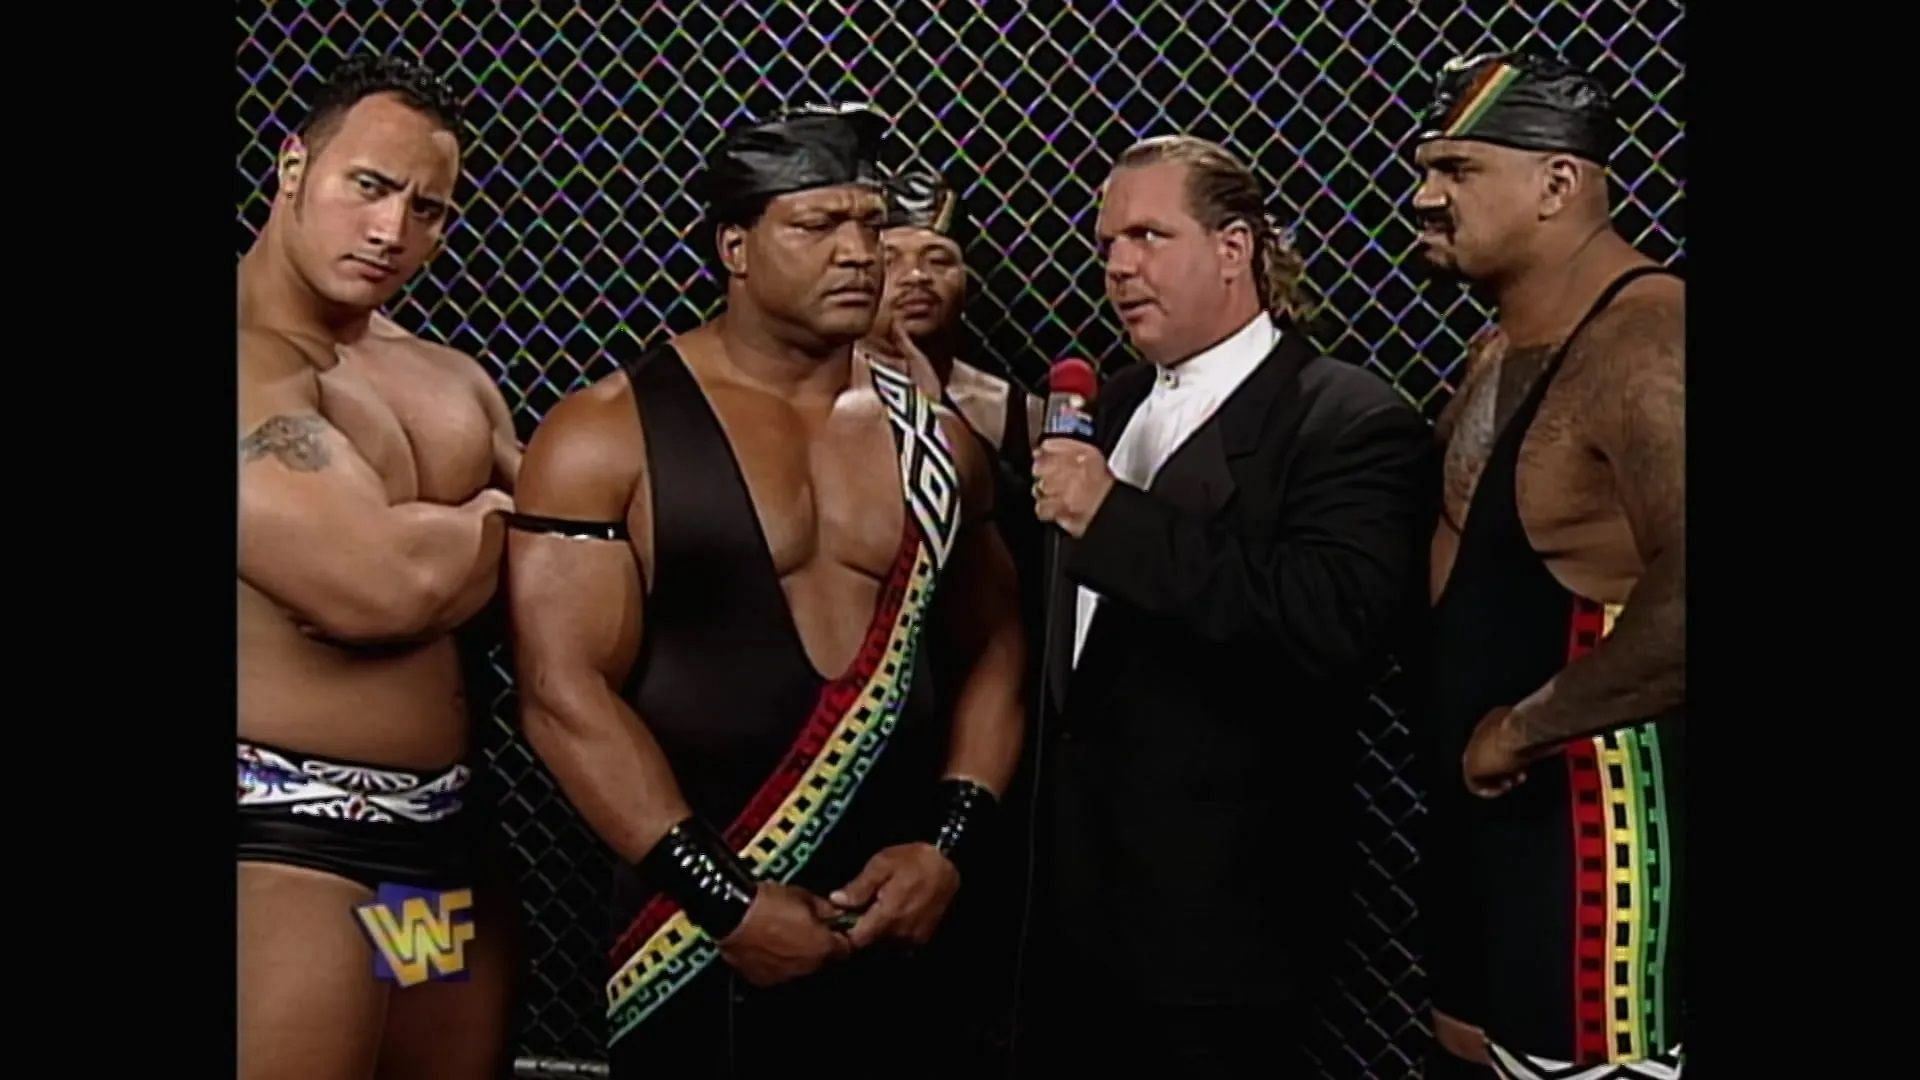 Ron Simmons, then known as Farooq, with the Nation of Domination